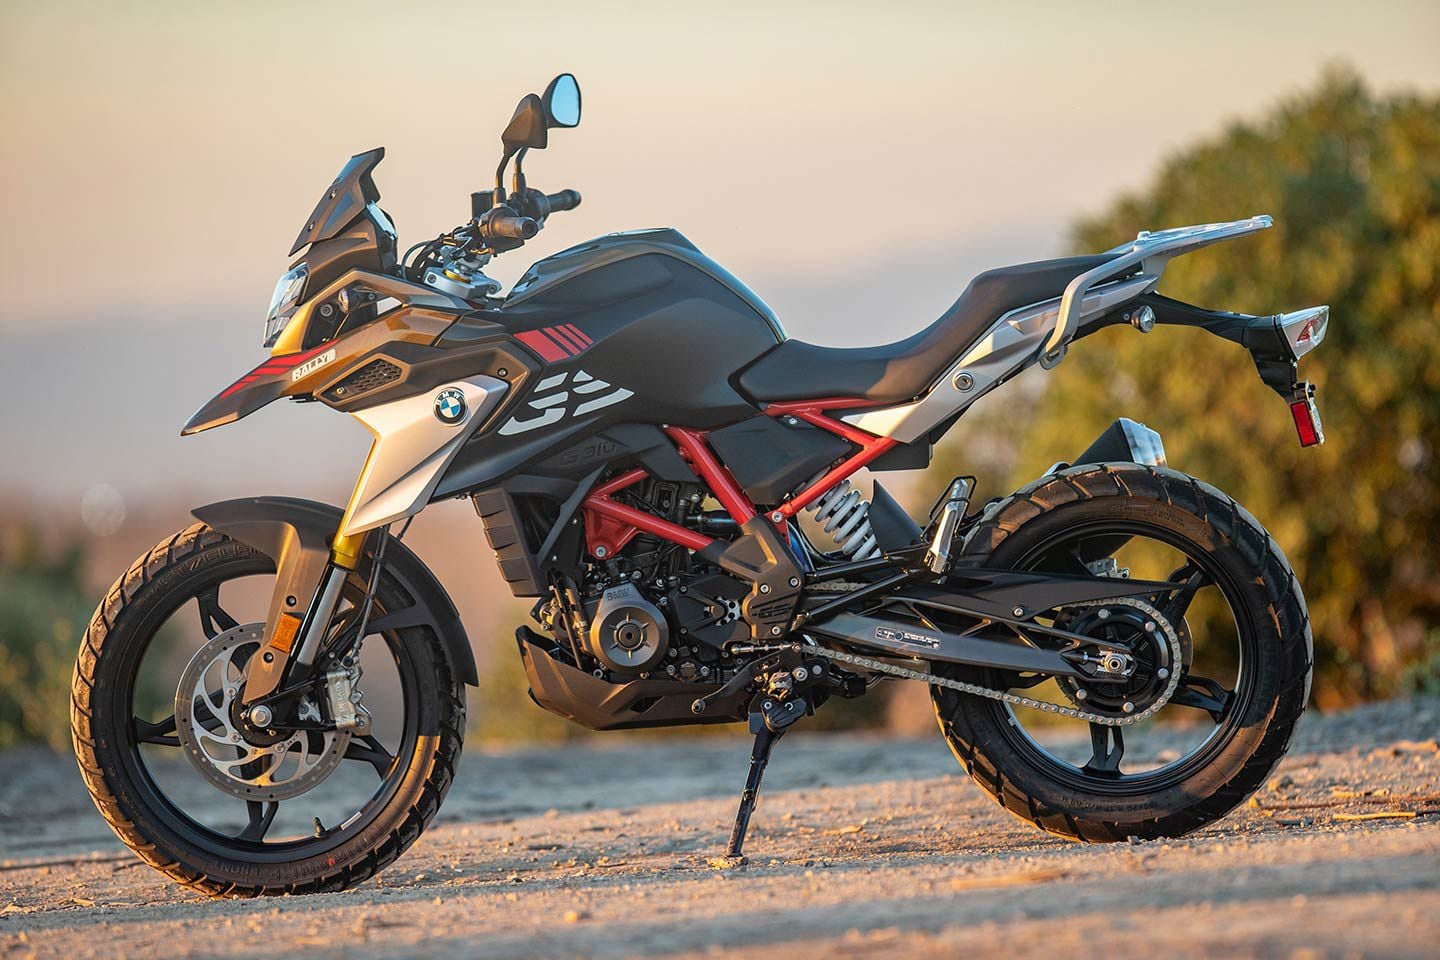 Standard seat height on the 2023 BMW G 310 GS is 32.8 inches. BMW offers a low seat option of 32.3 inches or a high seat option of 33.4 inches.